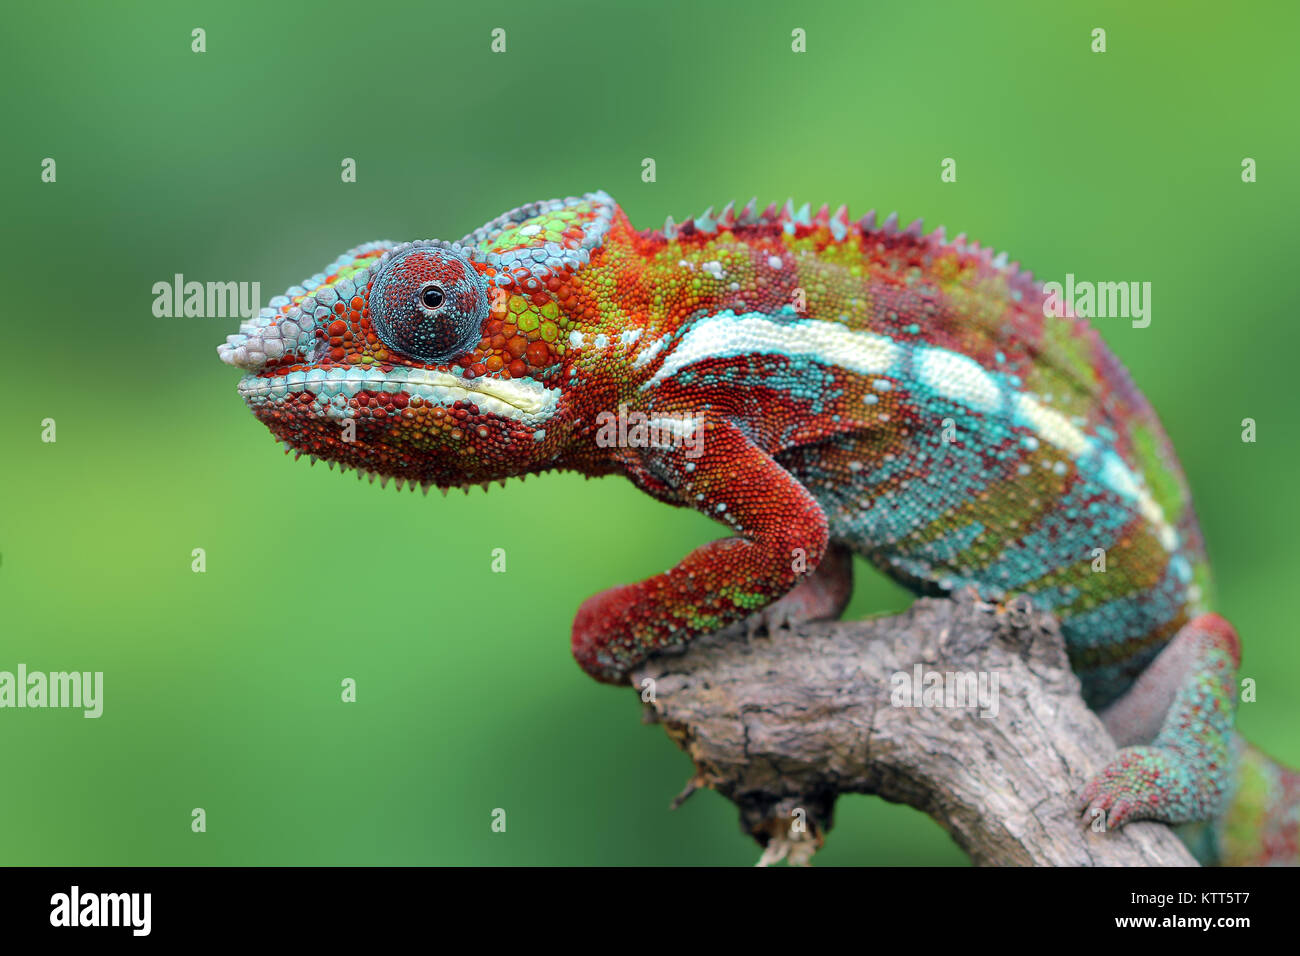 Panther Chameleon on a branch, Indonesia Stock Photo